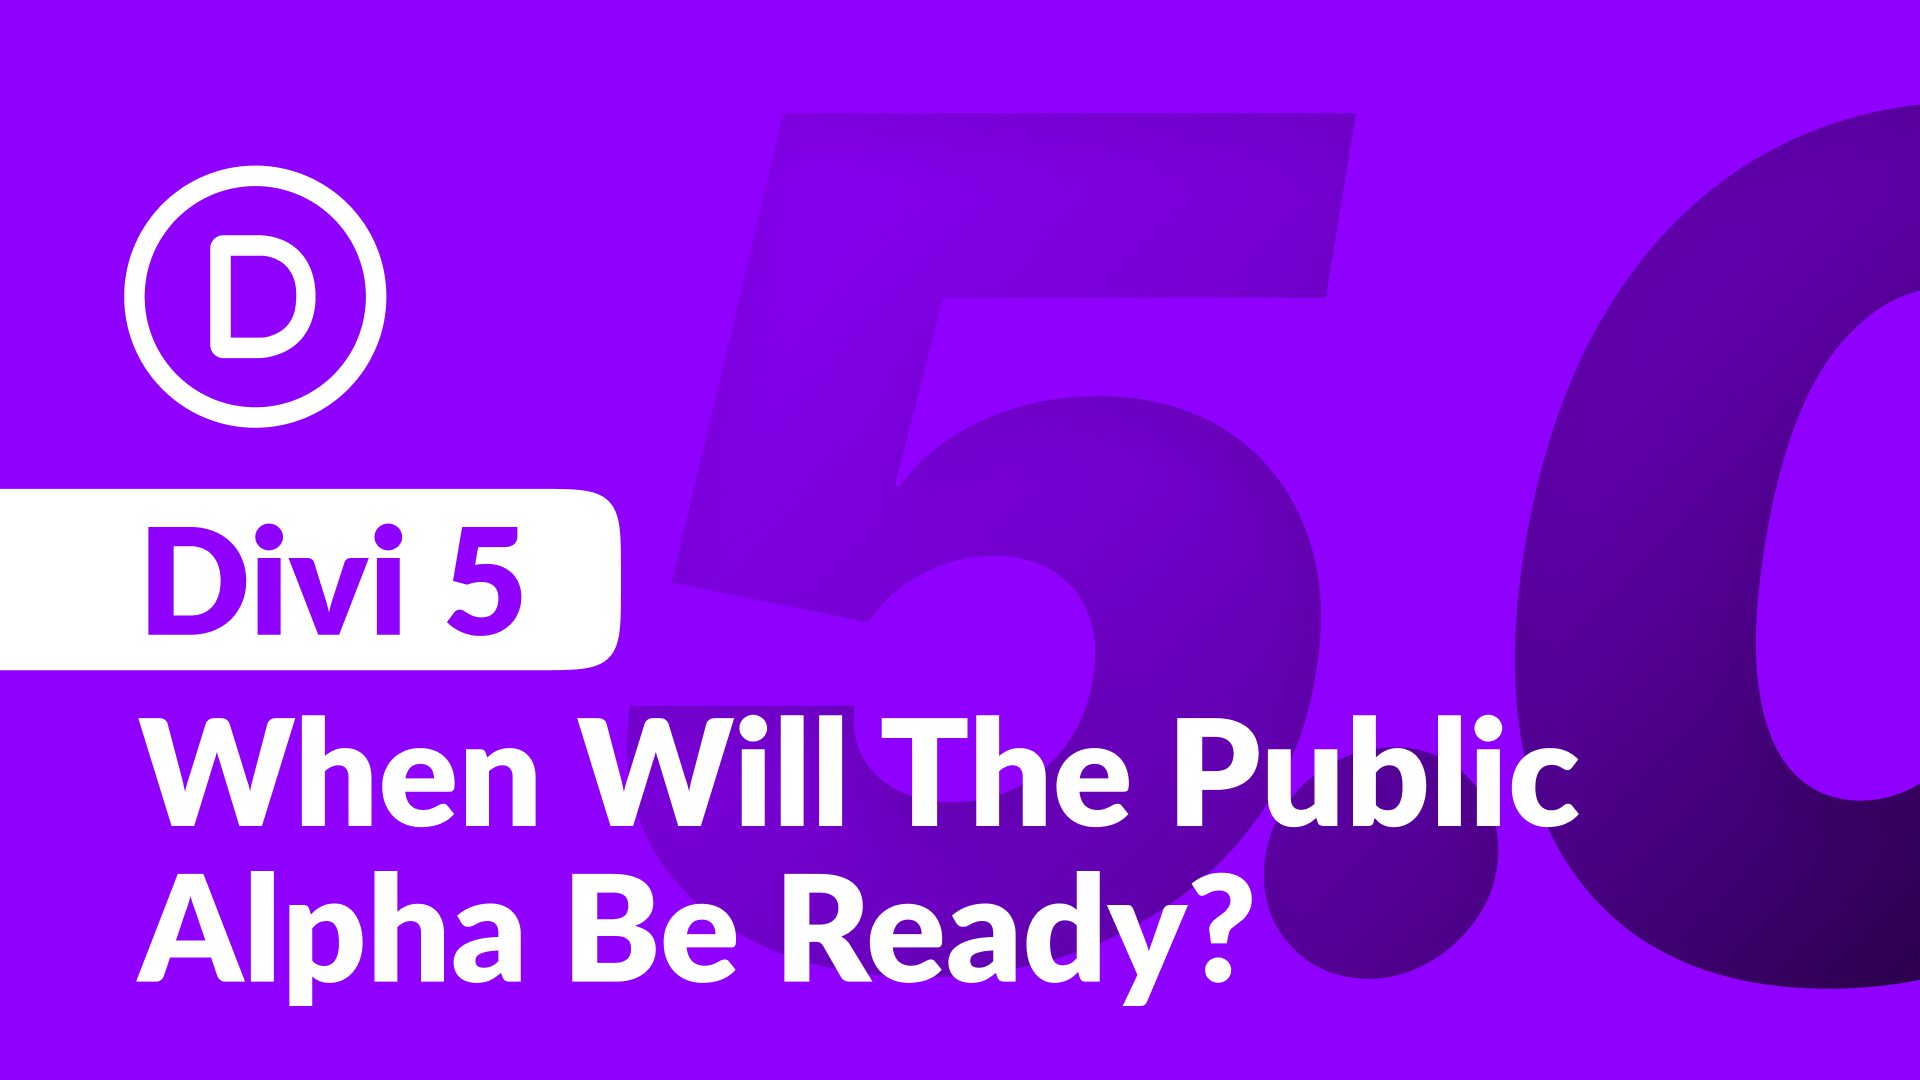 The Road to Divi 5: What You Need to Know